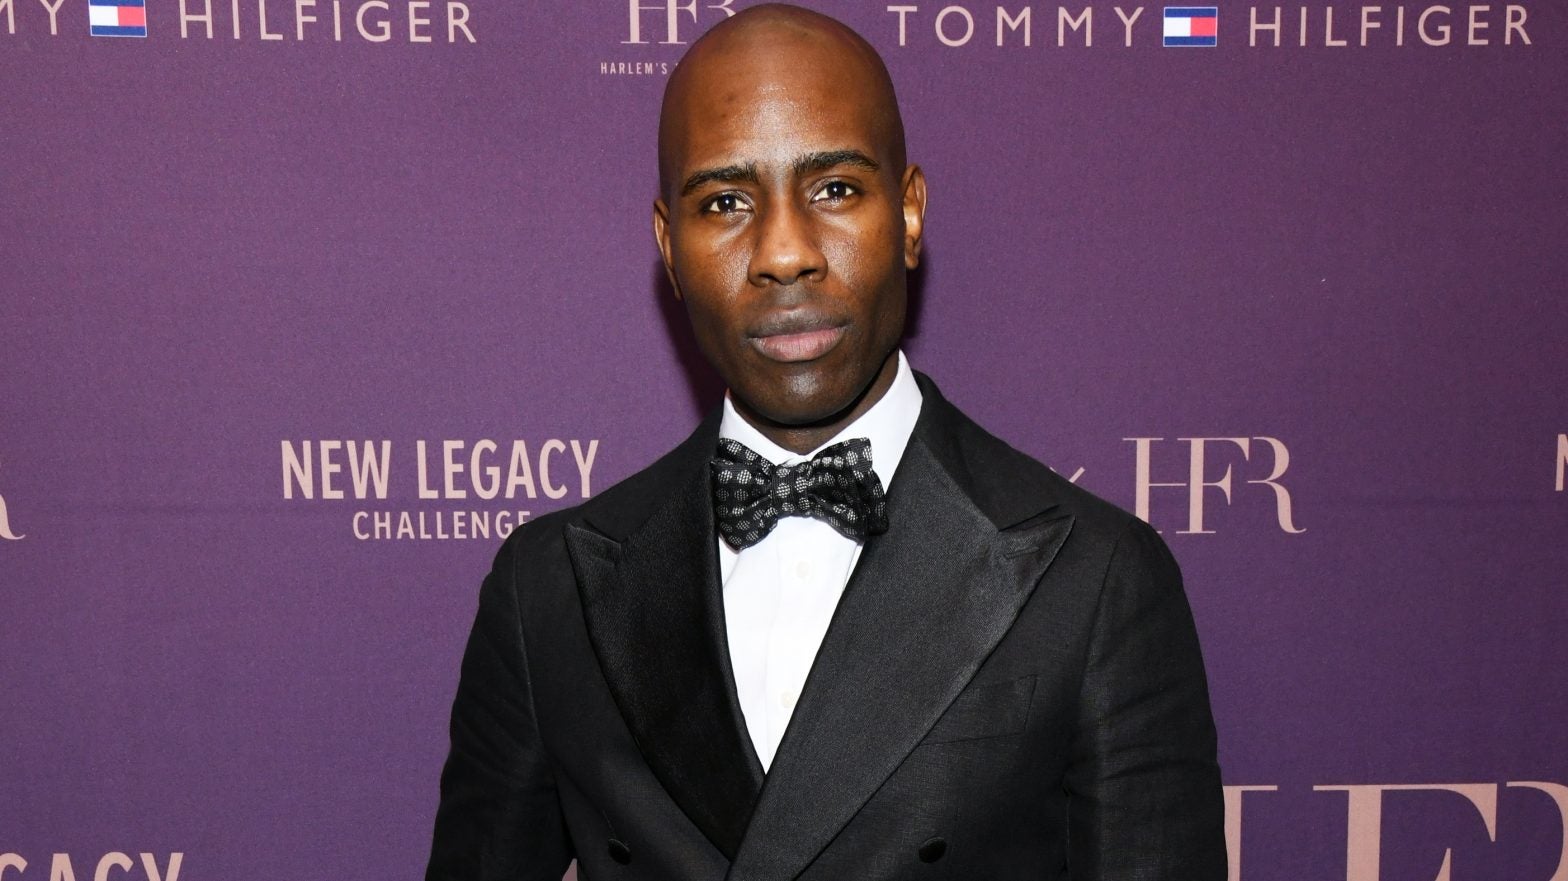 Tommy Hilfiger And Harlem’s Fashion Row Announce The Winning Designer Of The New Legacy Challenge